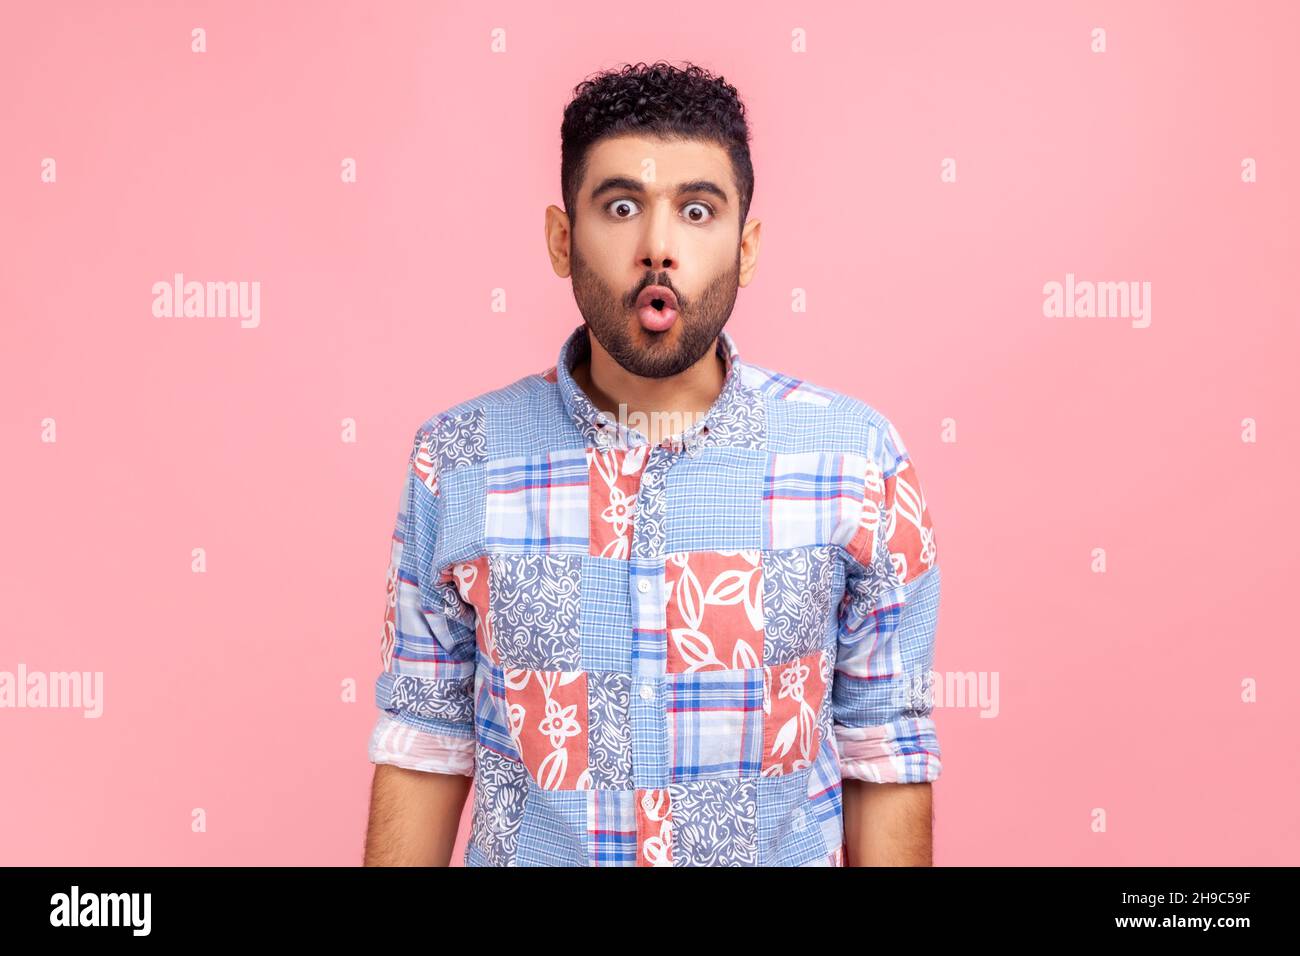 Portrait of excited funny man in blue casual style shirt with pout lips and big amazed eyes, looking surprised and silly at camera, wondered expression. Indoor studio shot isolated on pink background. Stock Photo